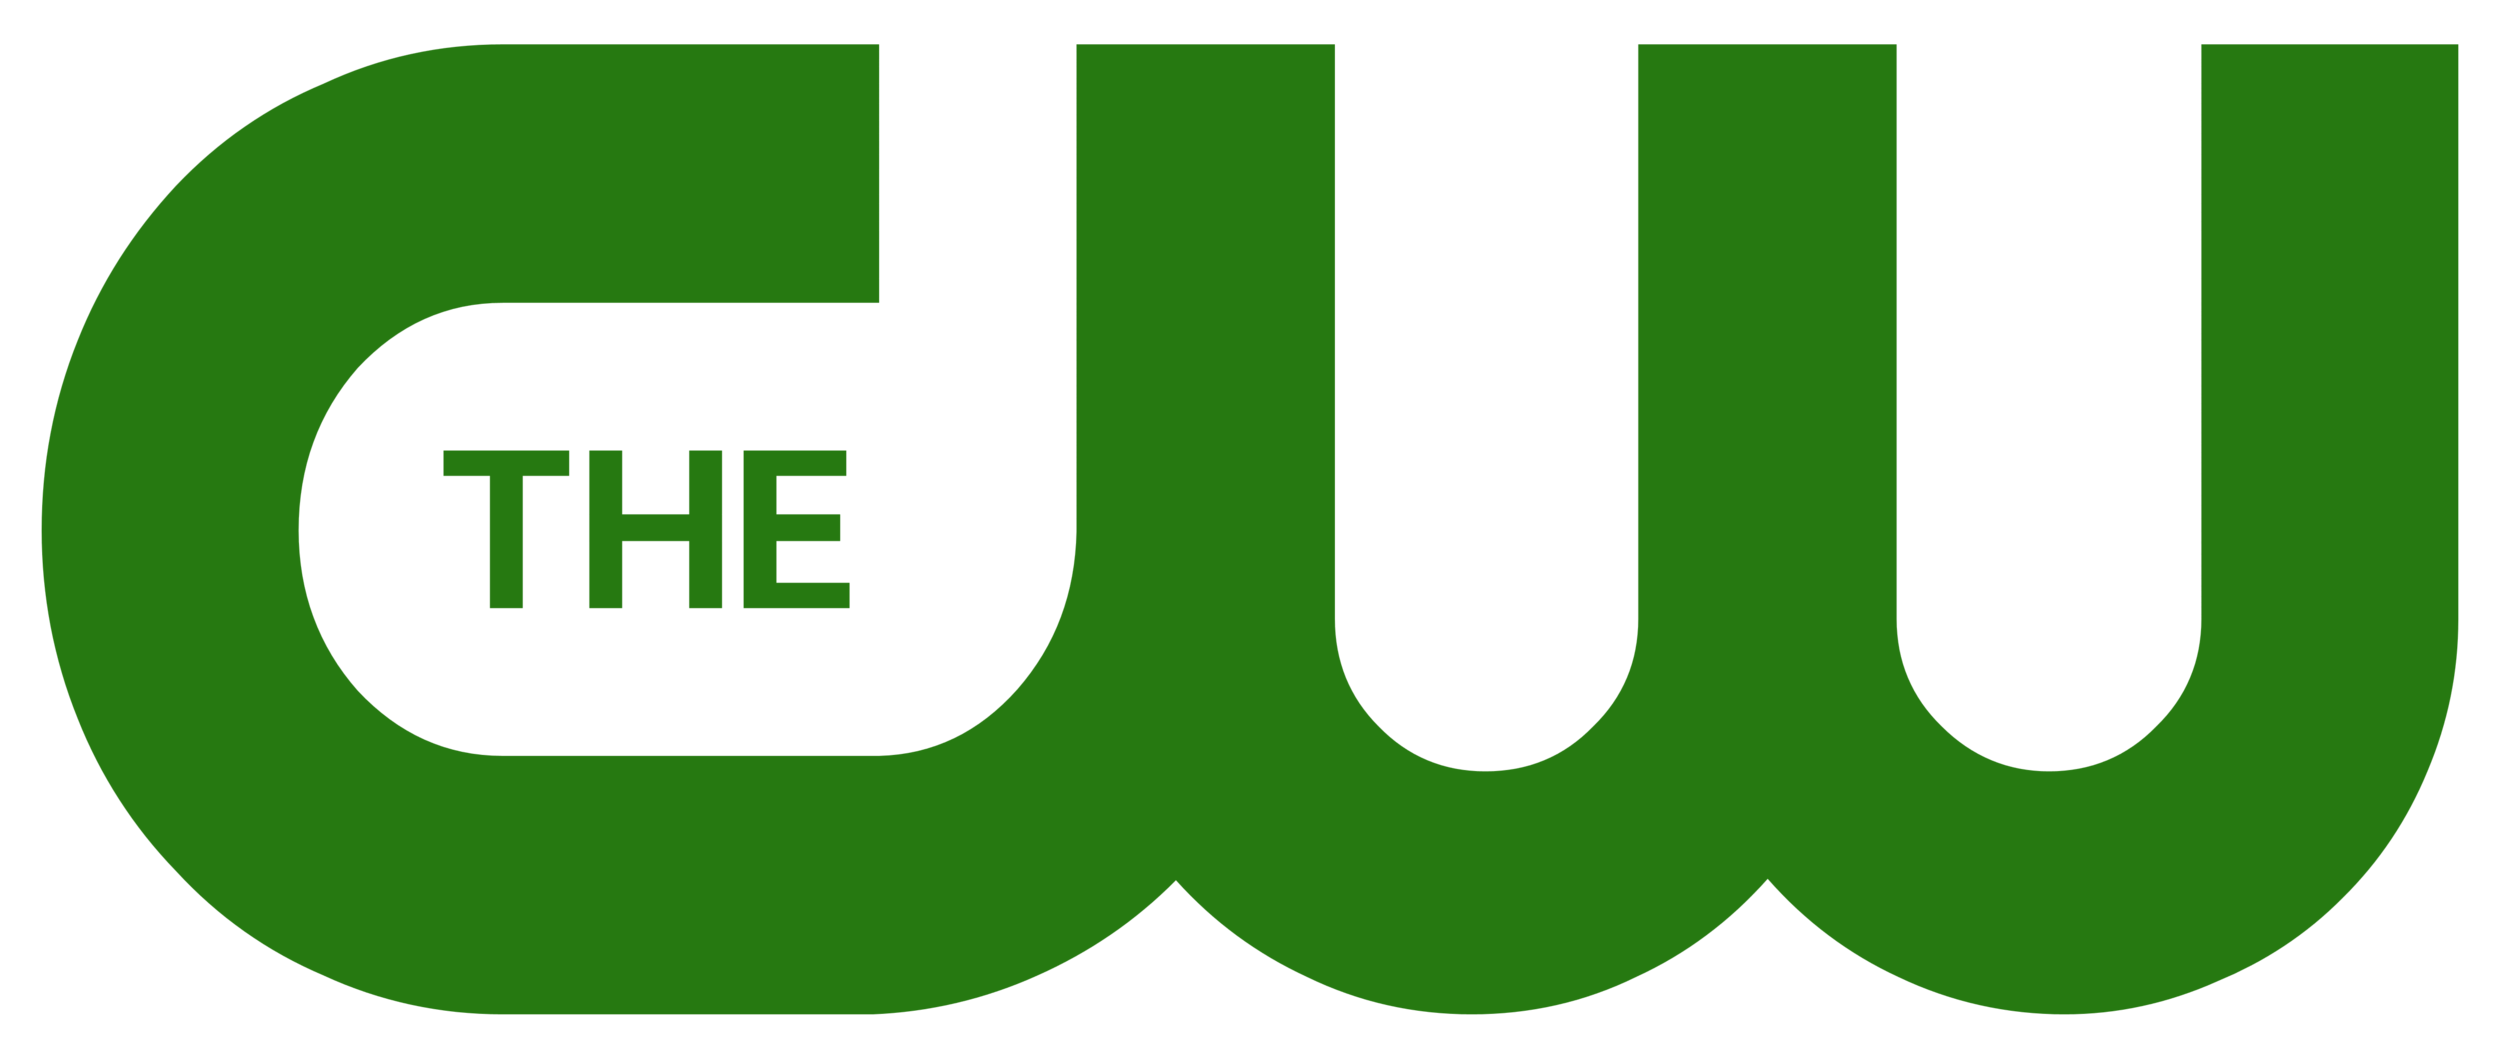 The_CW_logo_4800x2000.png